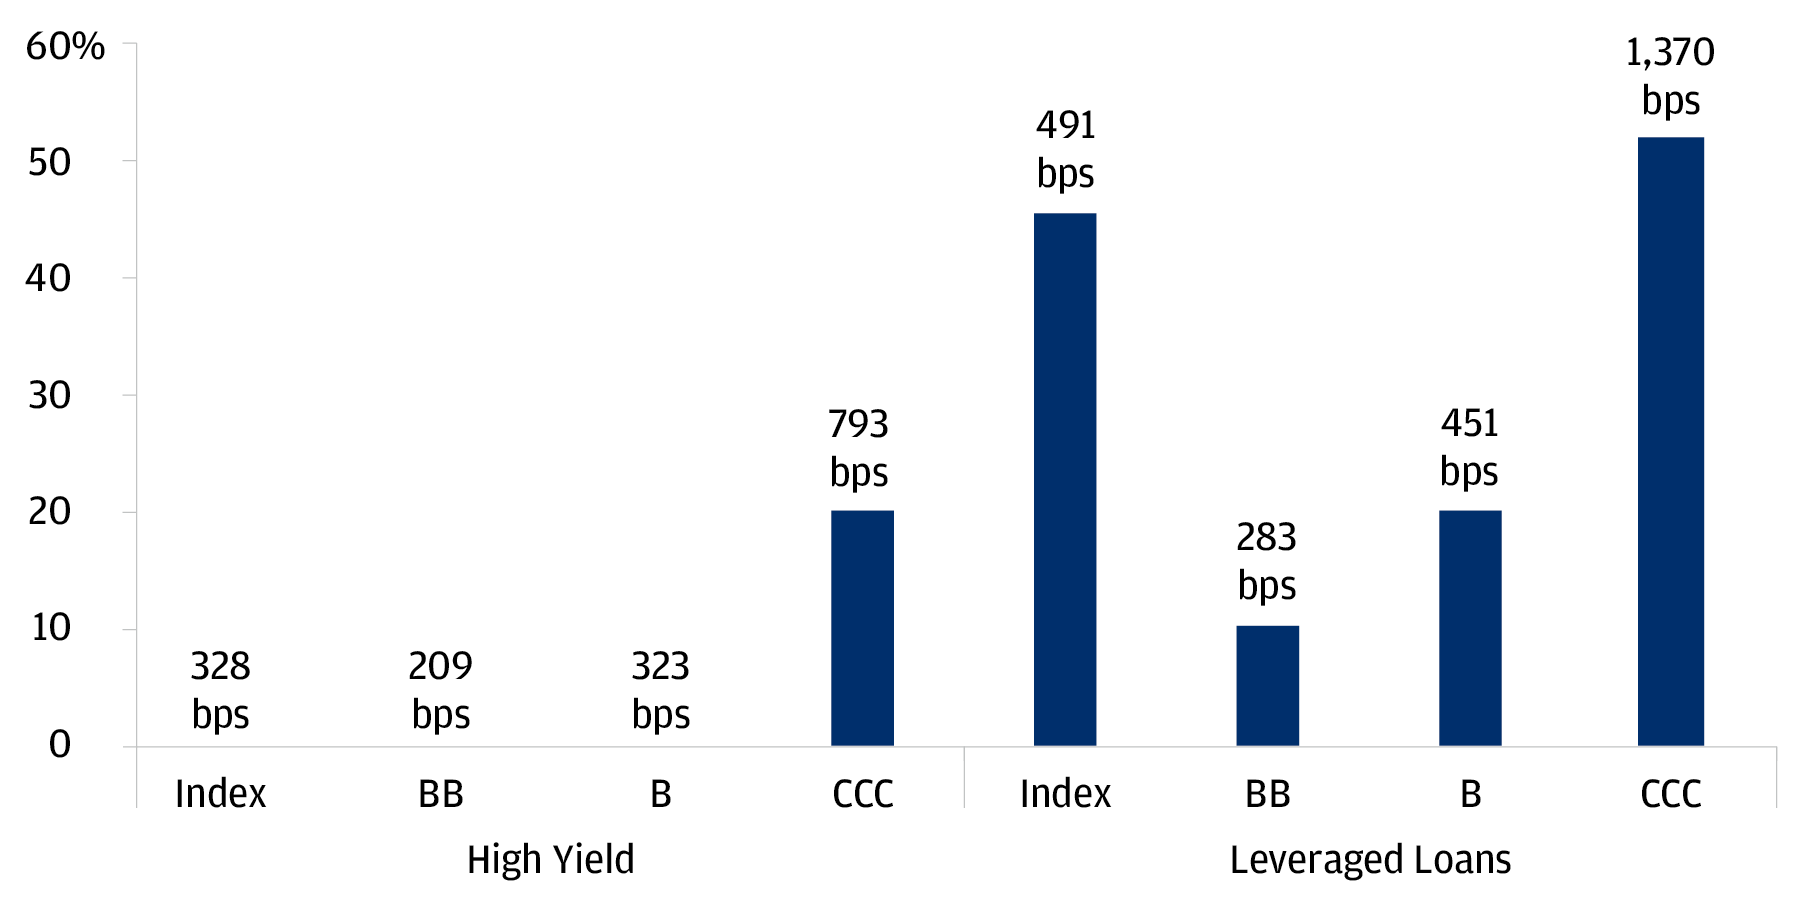 This shows the percentile of current corporate credit spreads since 2010 for the high yield market and leverage loan market at both the index level and credit ratings buckets.